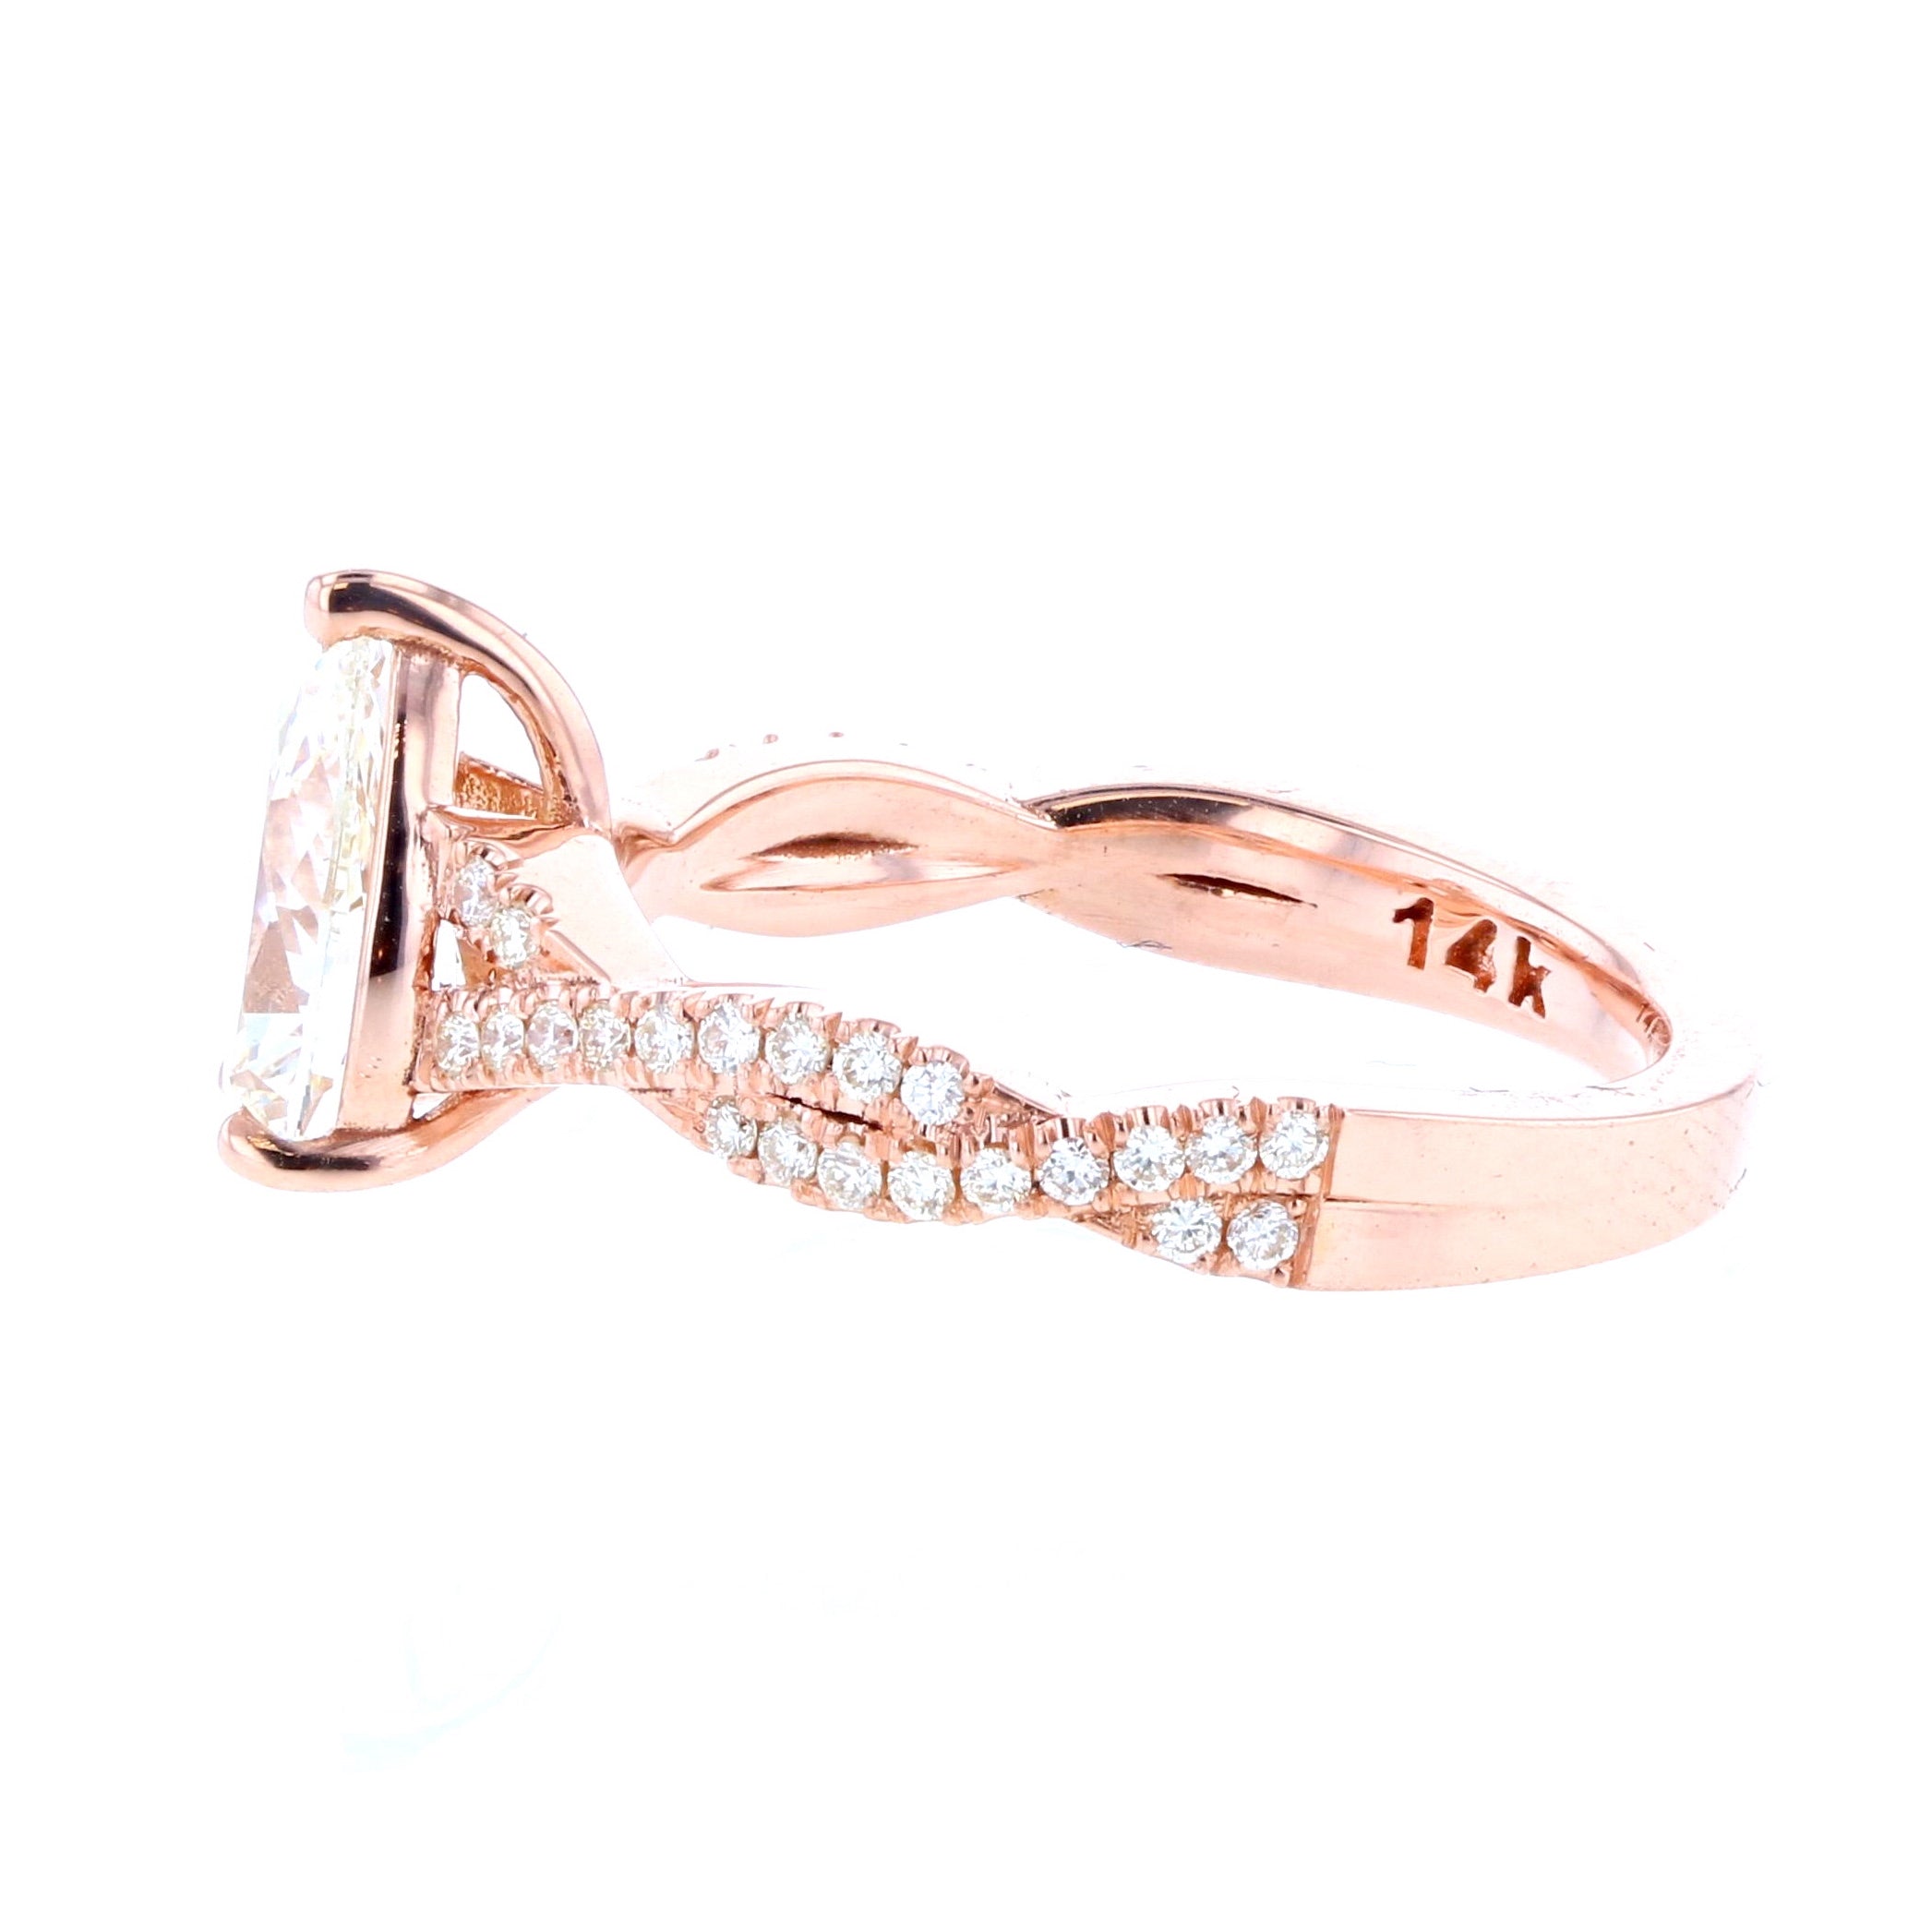 Pear Shaped Diamond Engagement Ring with Twisted Shank, Pave in Rose Gold